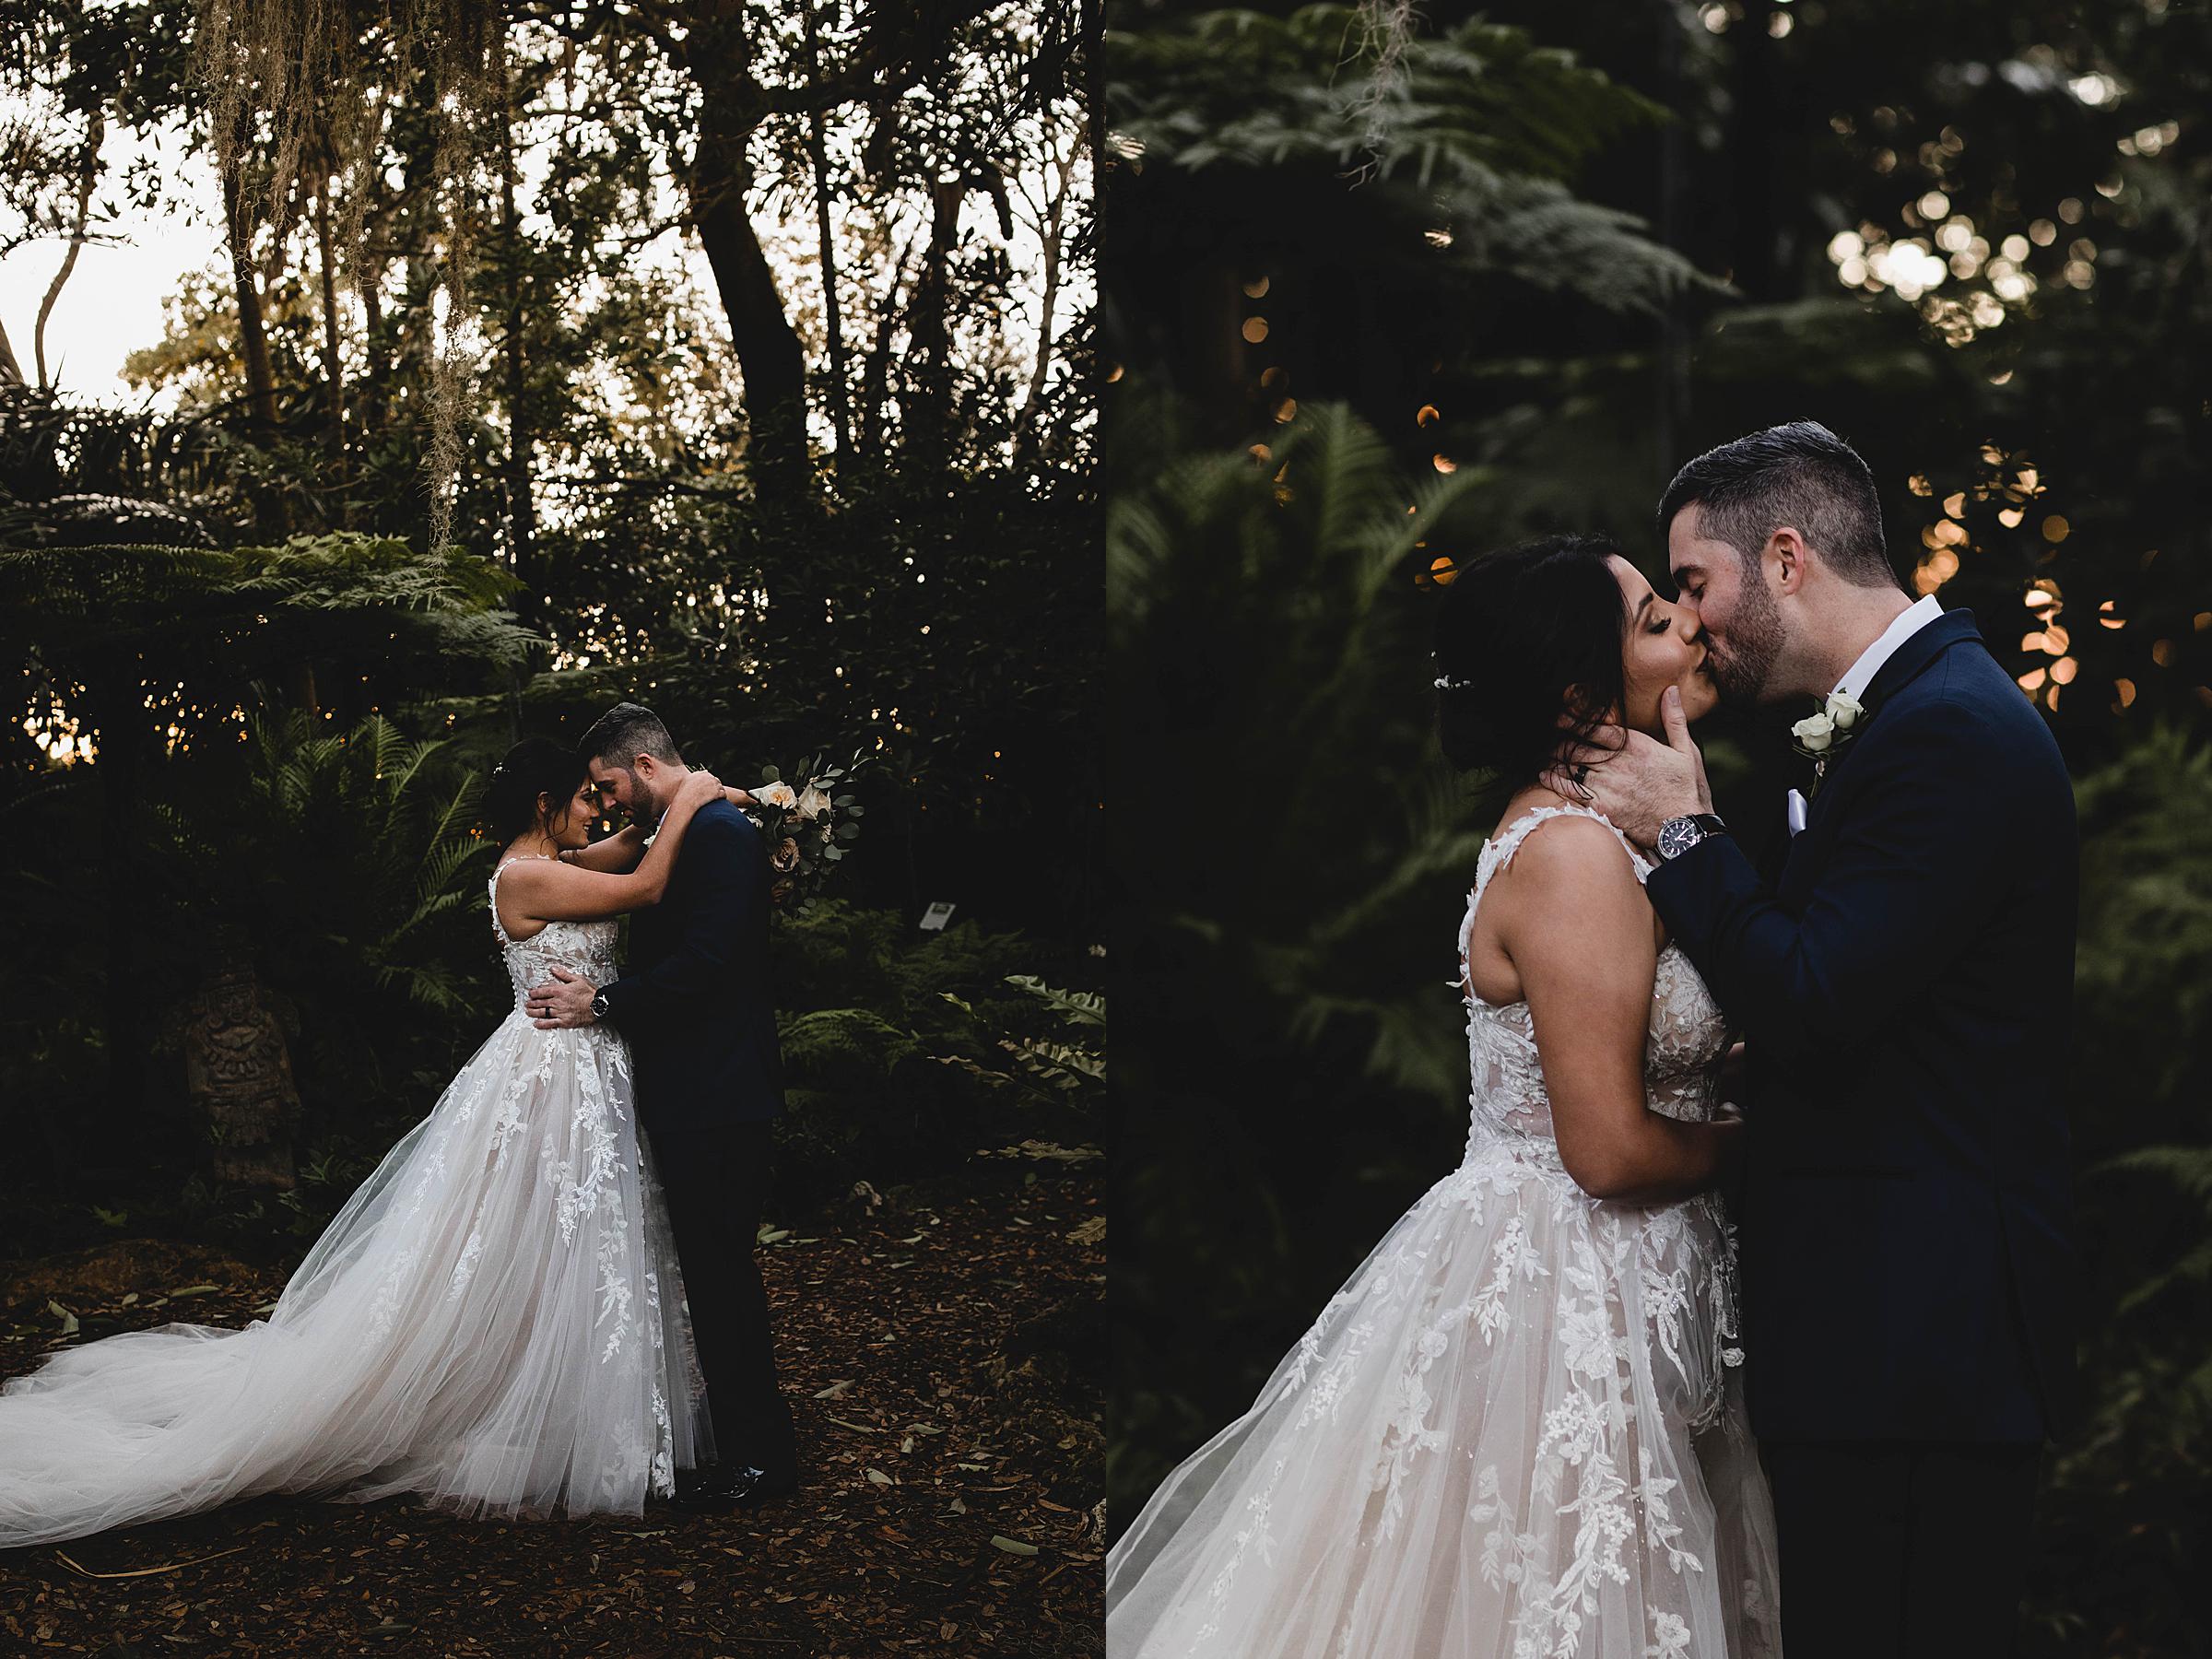 newlyweds kissing in the gardens at Selby Gardens, Selby gardens wedding photographer